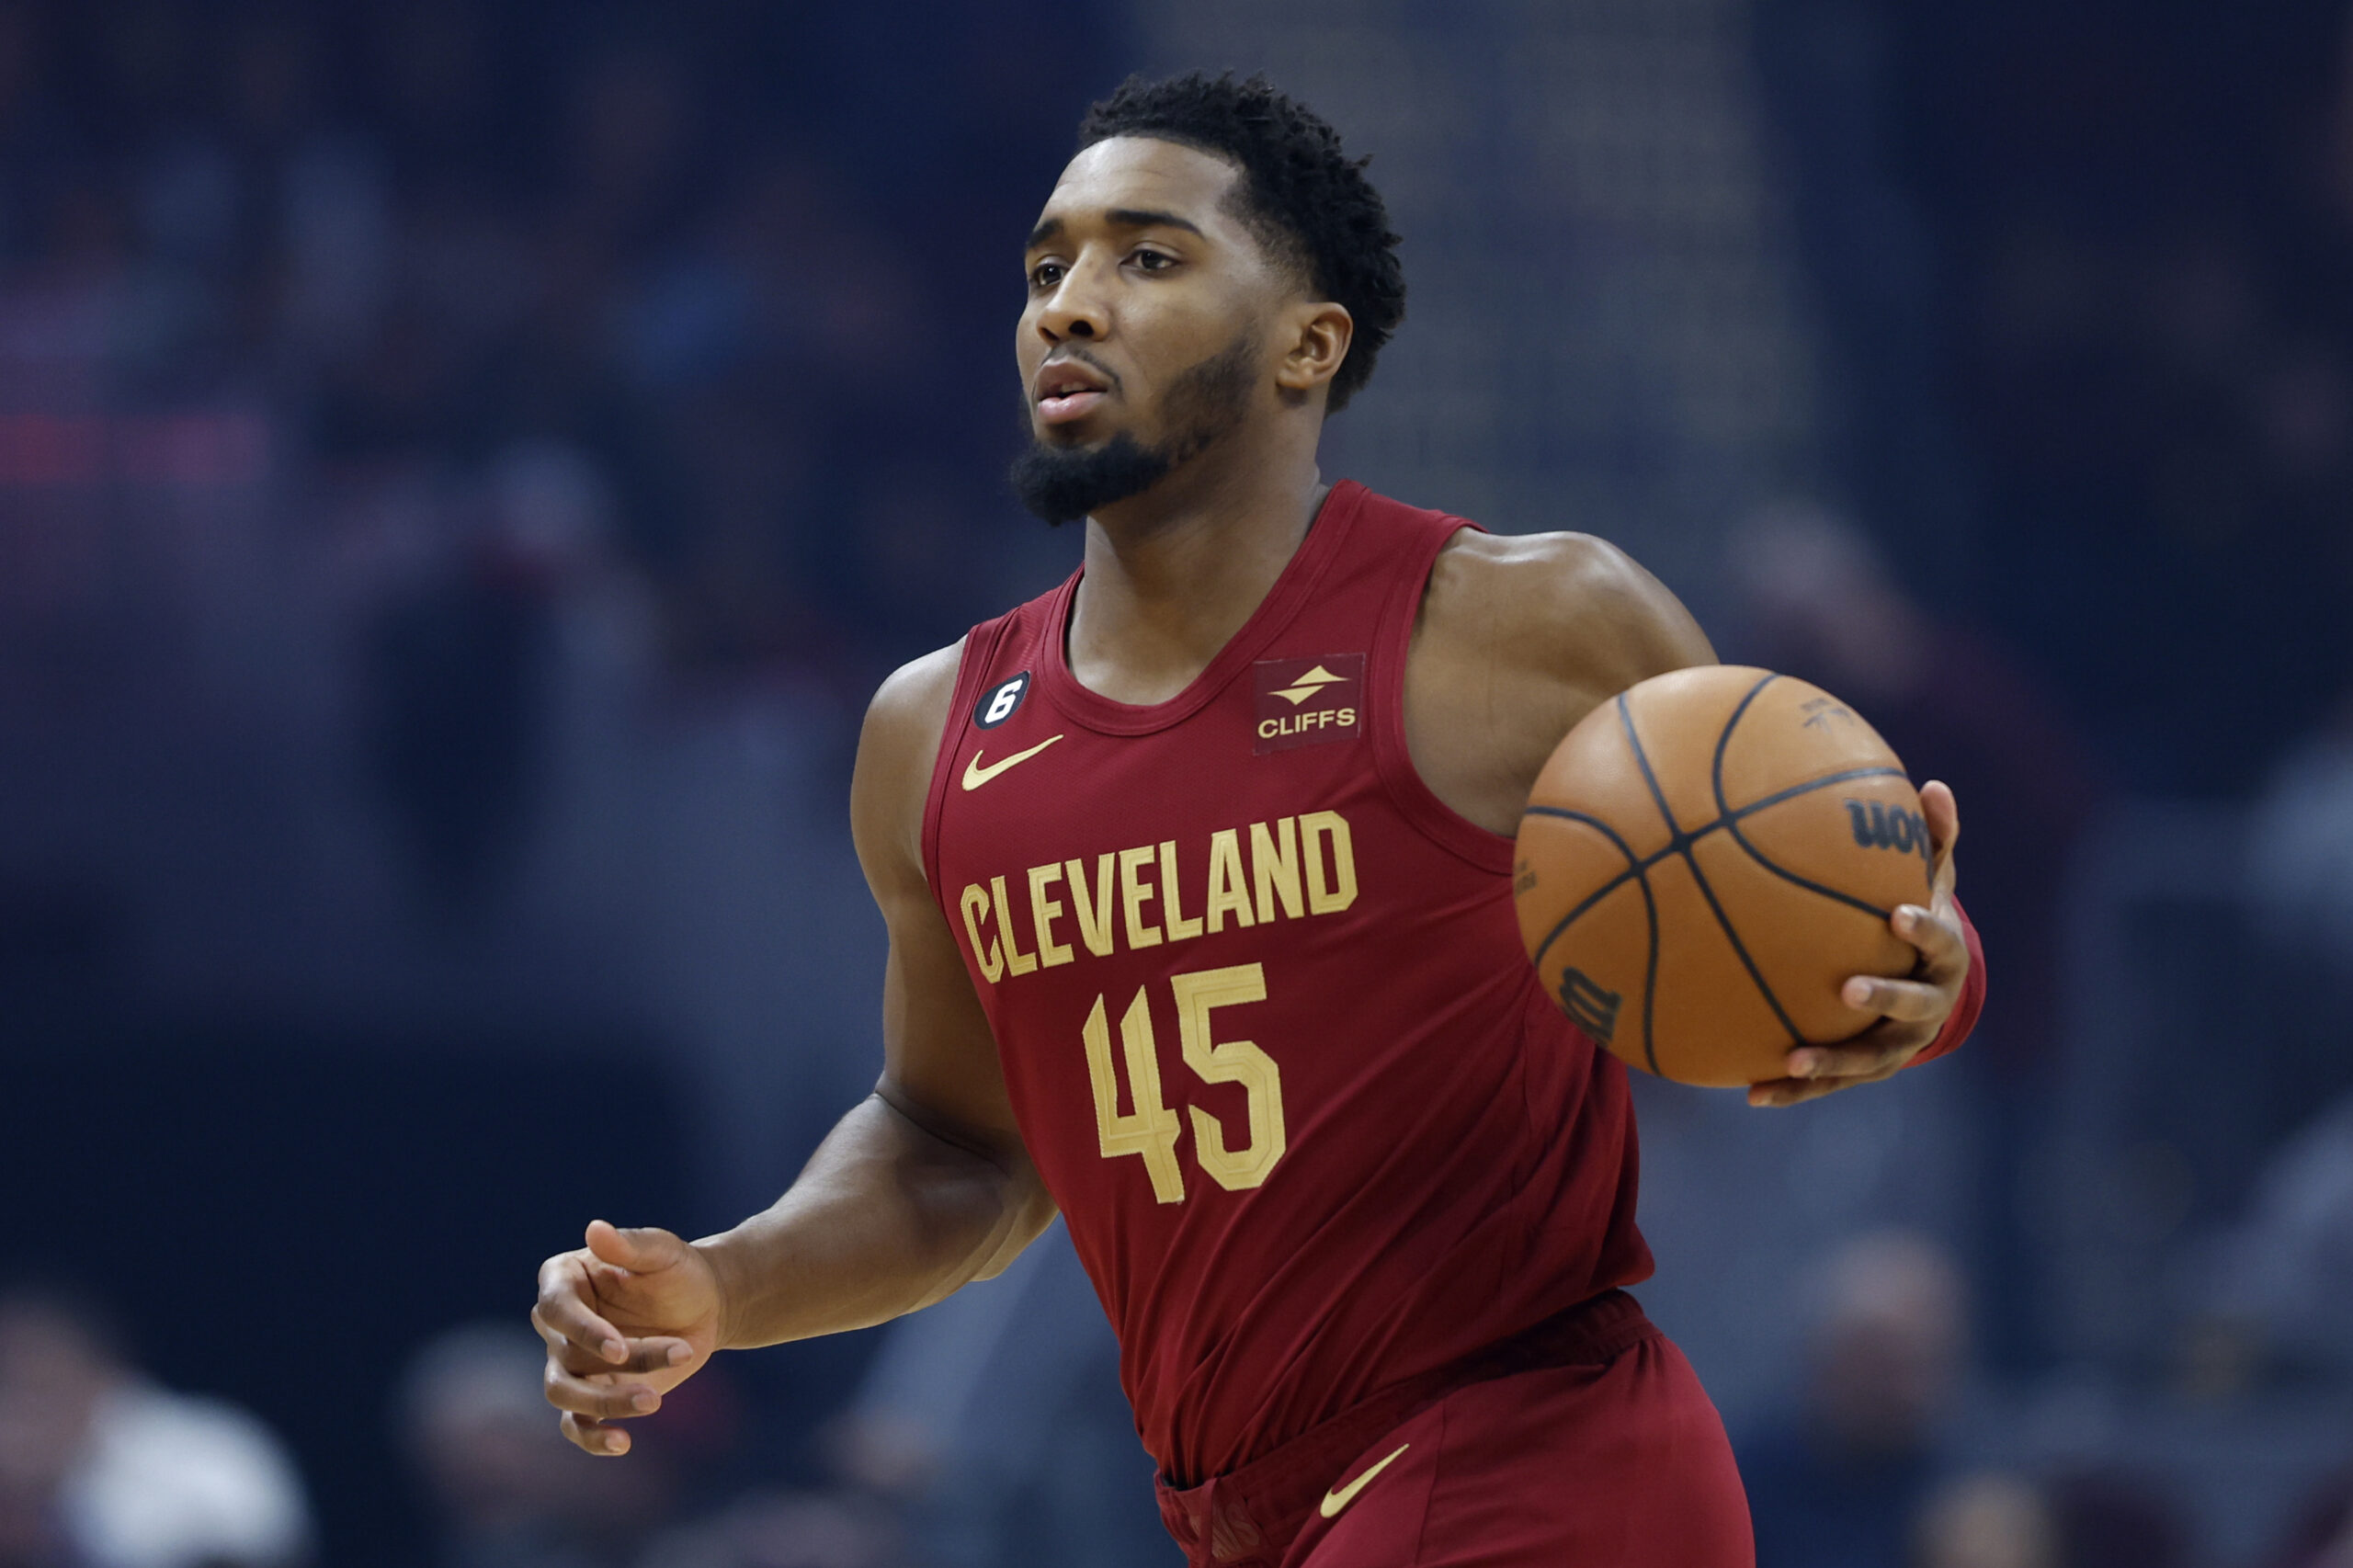 Donovan Mitchell,
Cavaliers' Donovan Mitchell Trade To The Clippers In Proposal